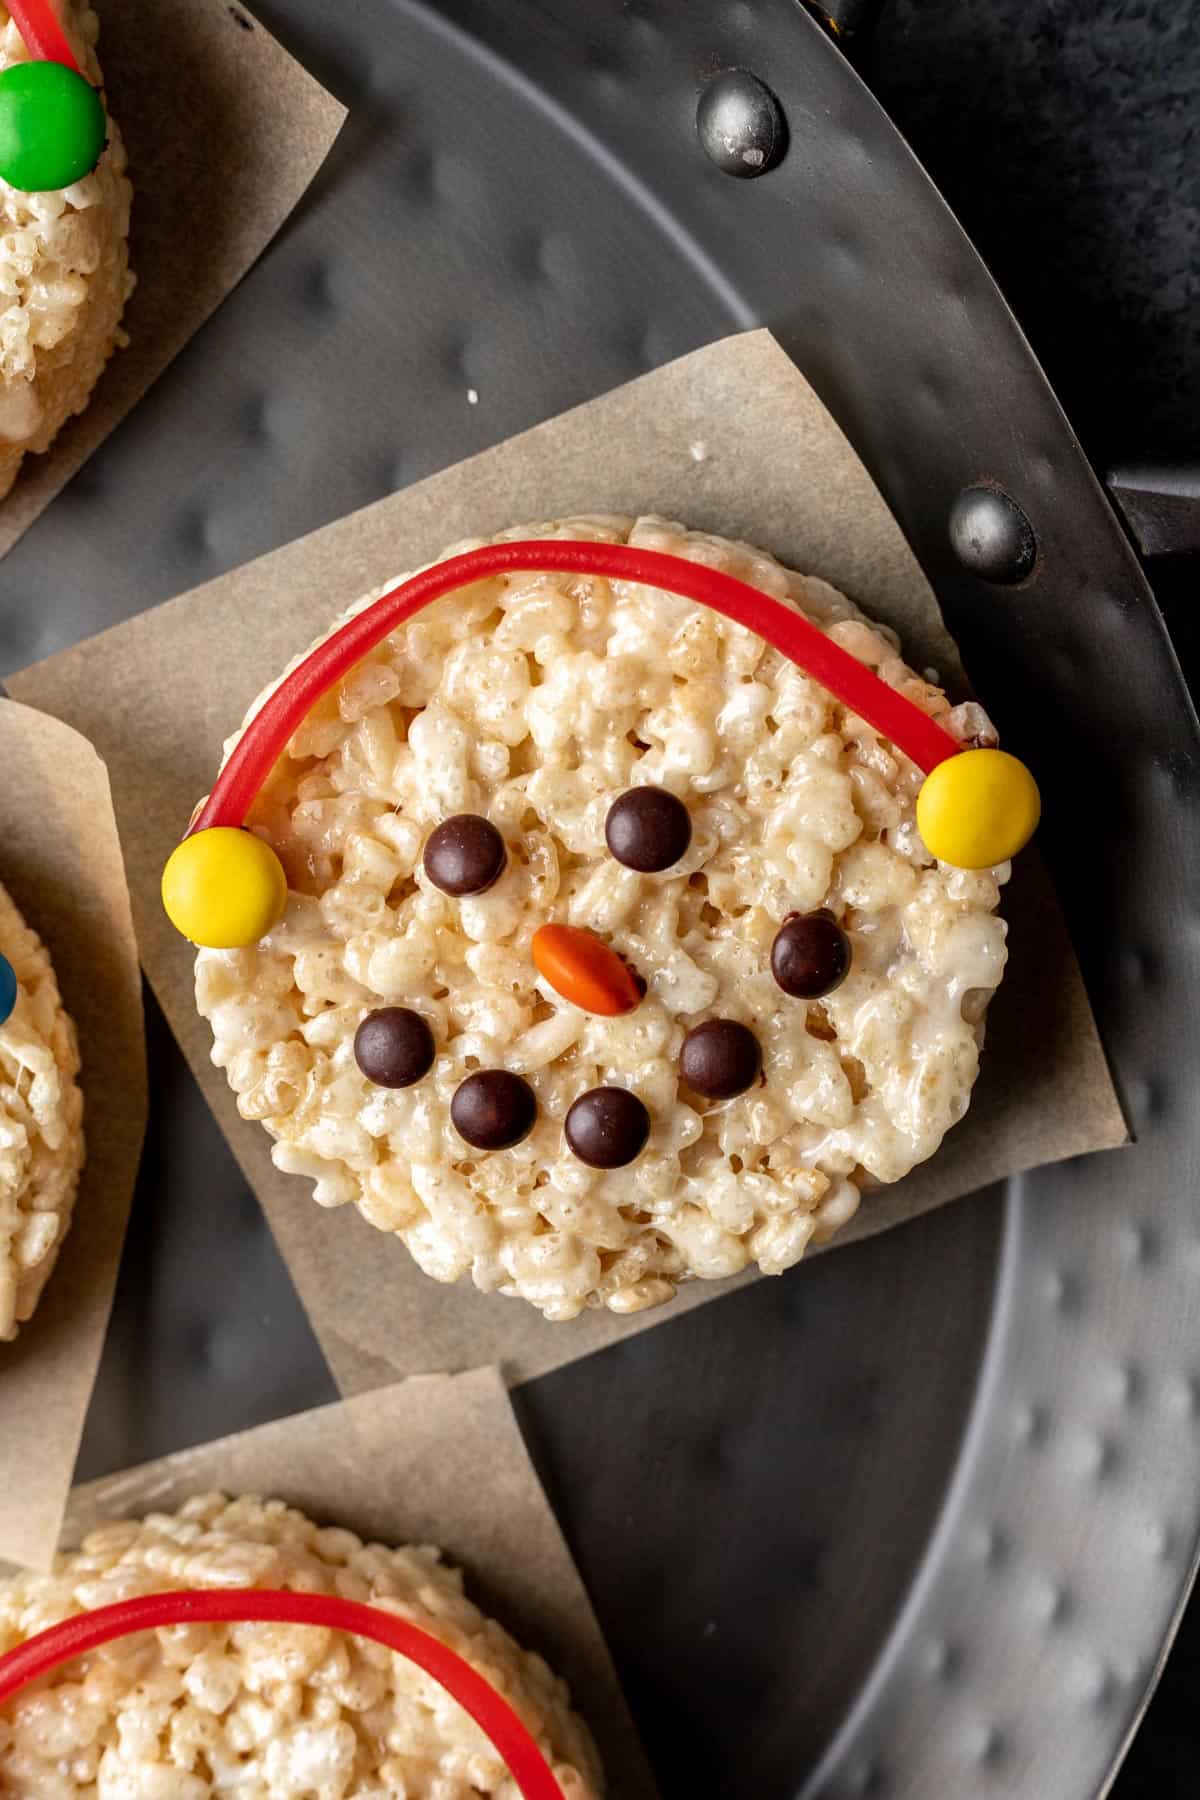 A snowman rice krispie treat with yellow candy earmuffs and an orange candy nose.